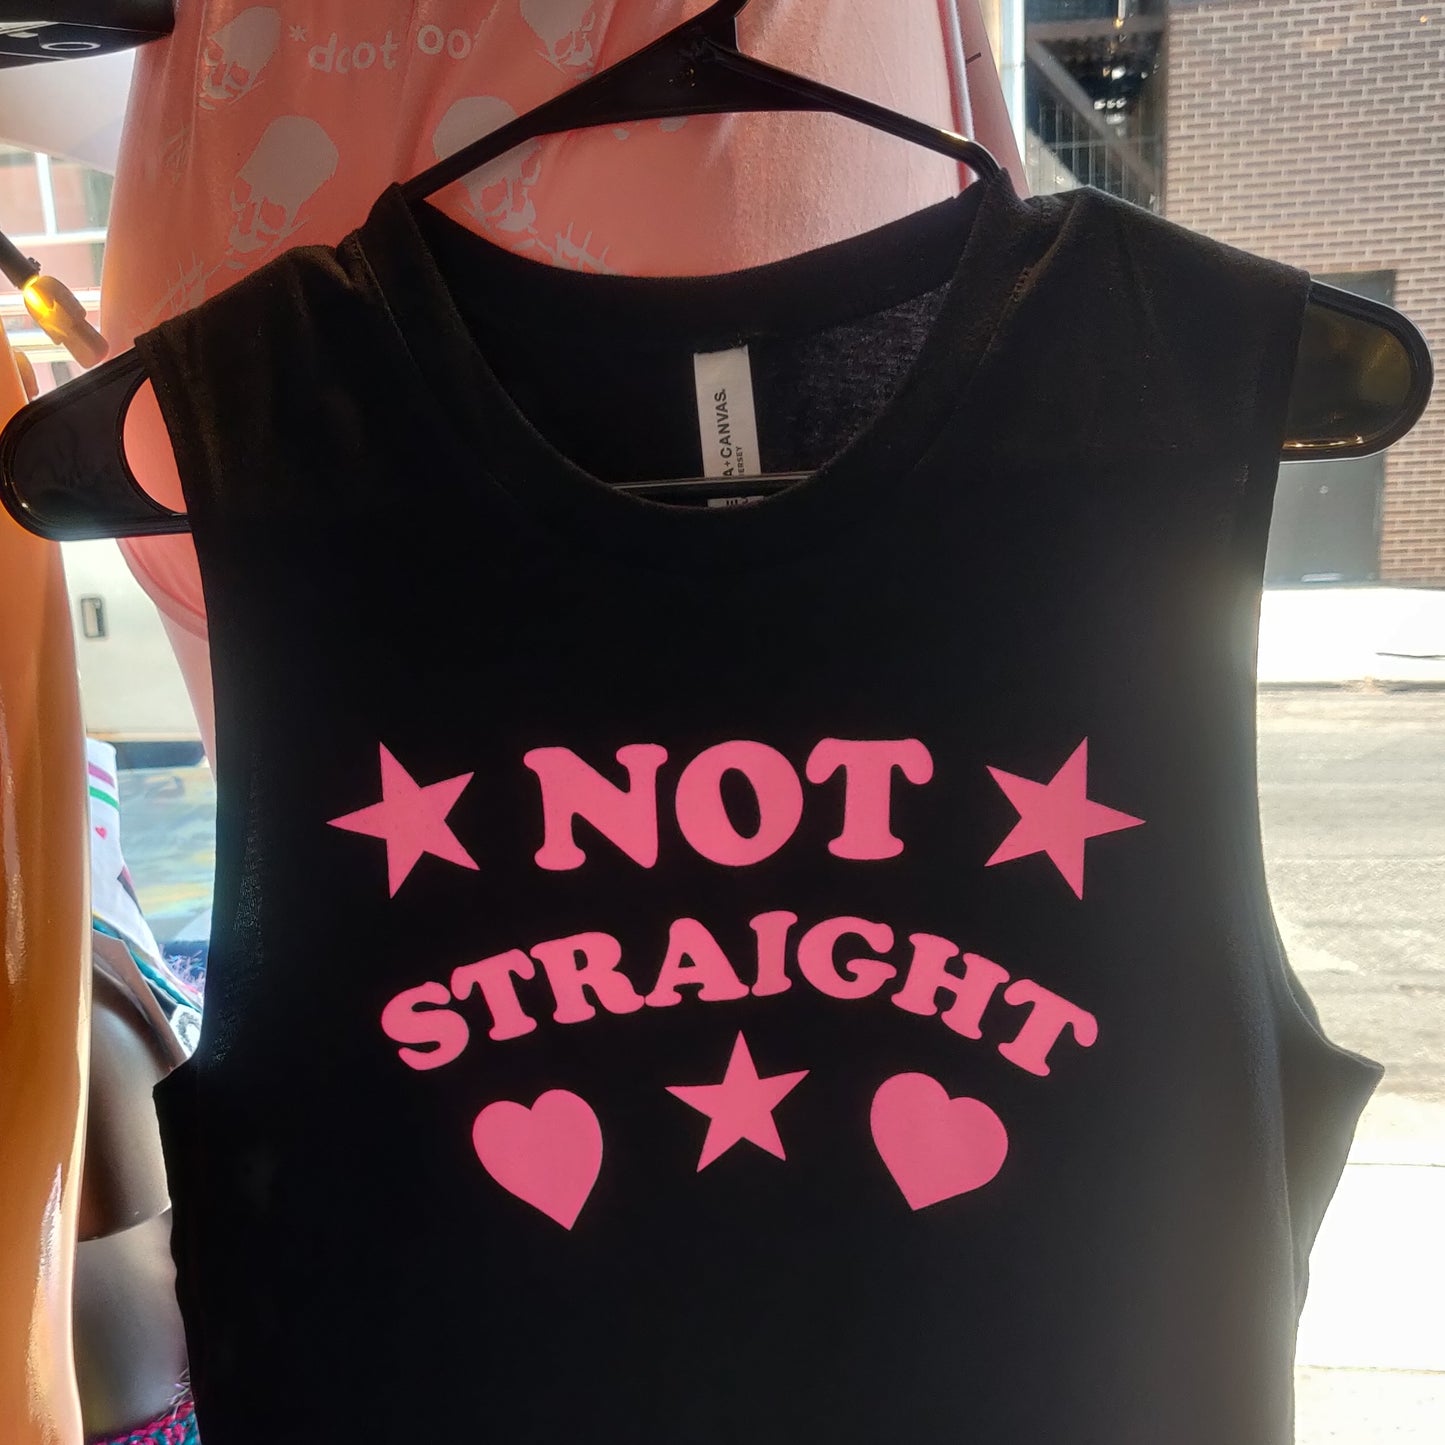 Not Straight MUSCLE TEE